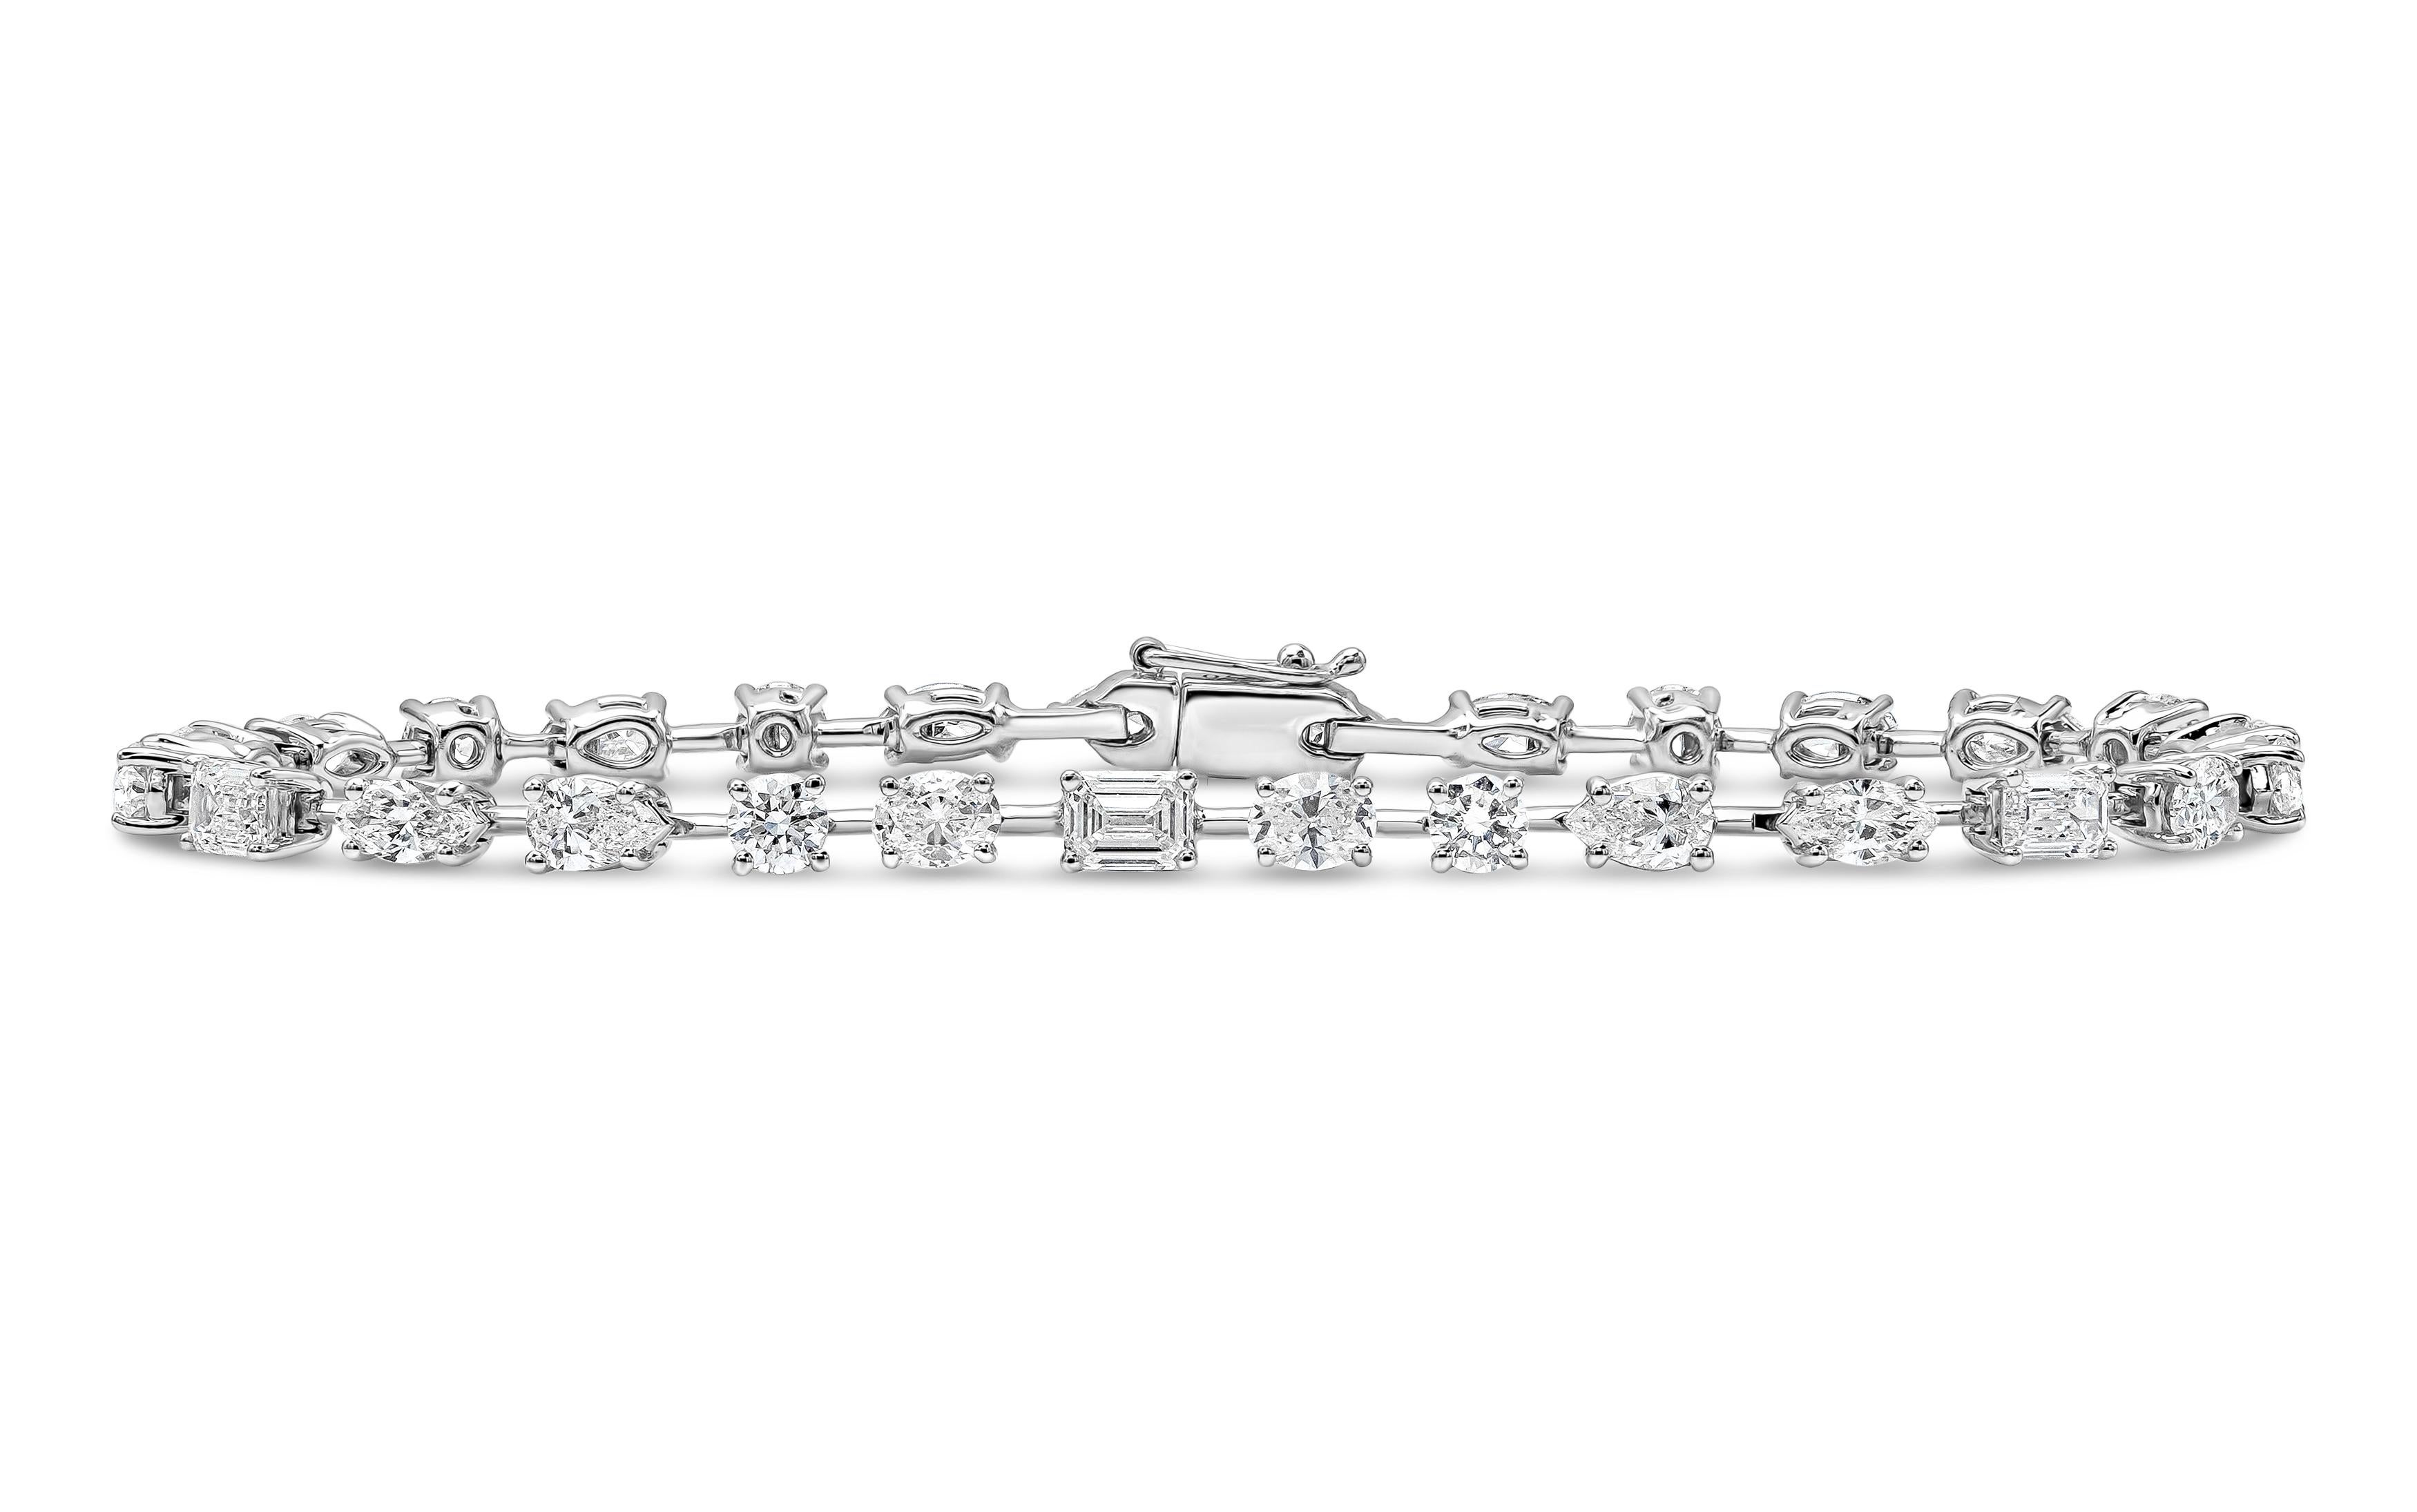 Custom Order: 3-4 Weeks to handcraft. 

Showcasing a row of different shape diamonds, set in a tennis bracelet style. Diamonds weigh approximately 5.50 carats total. Made in 18k white gold. Seven inches in length. 

Customizable, length, size, and